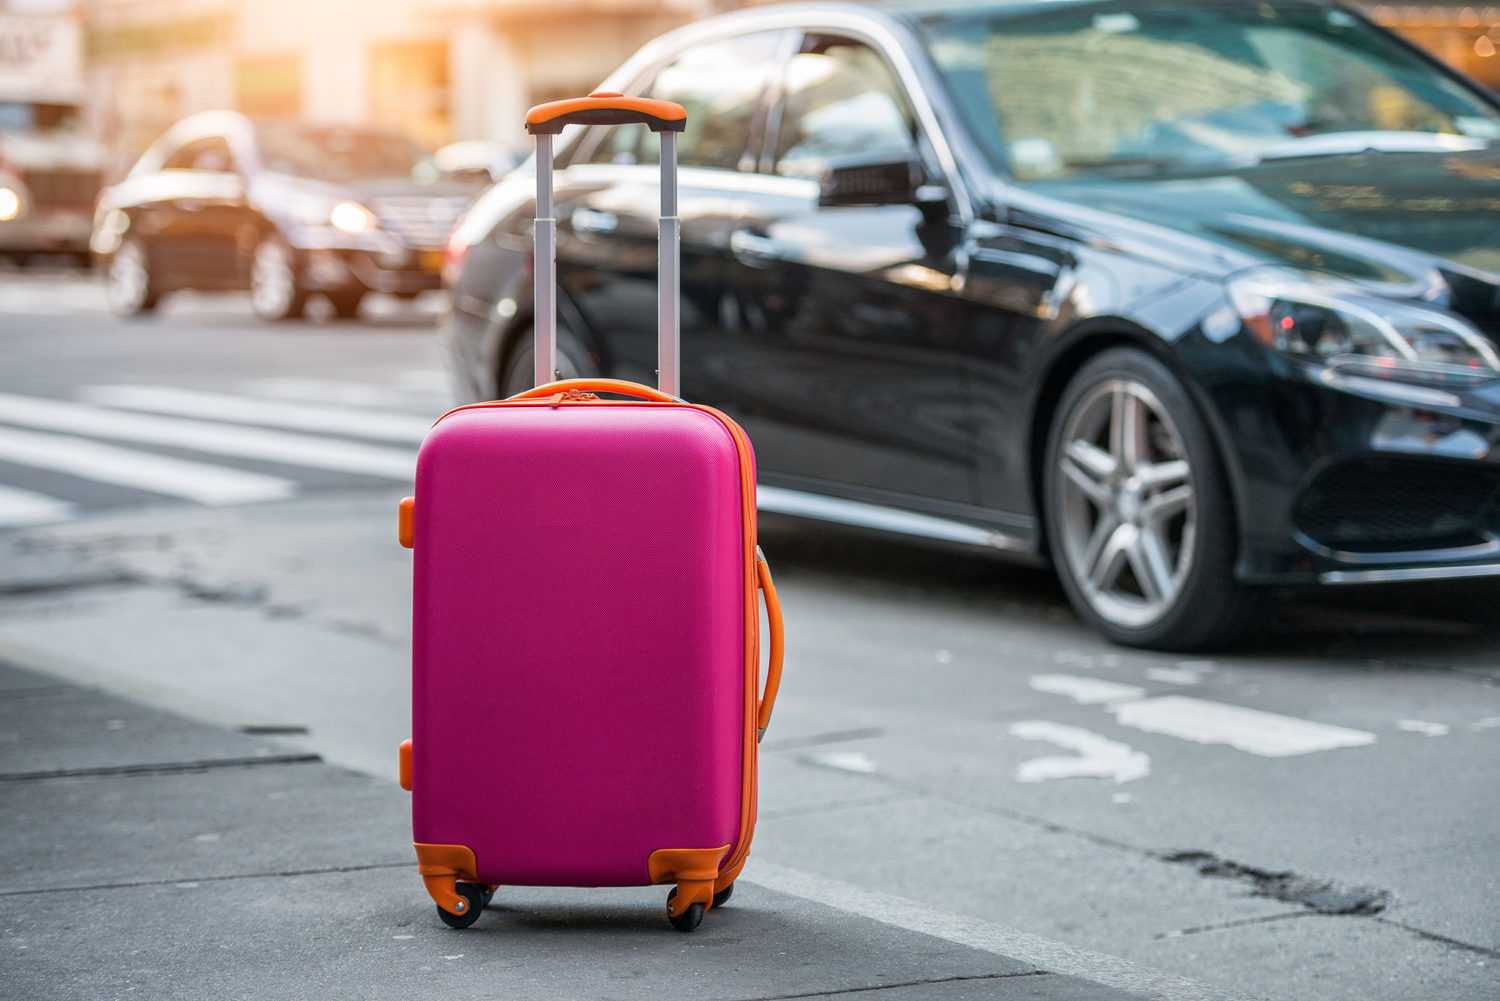 Pink suitcase waiting on a sidewalk with black luxury car in background